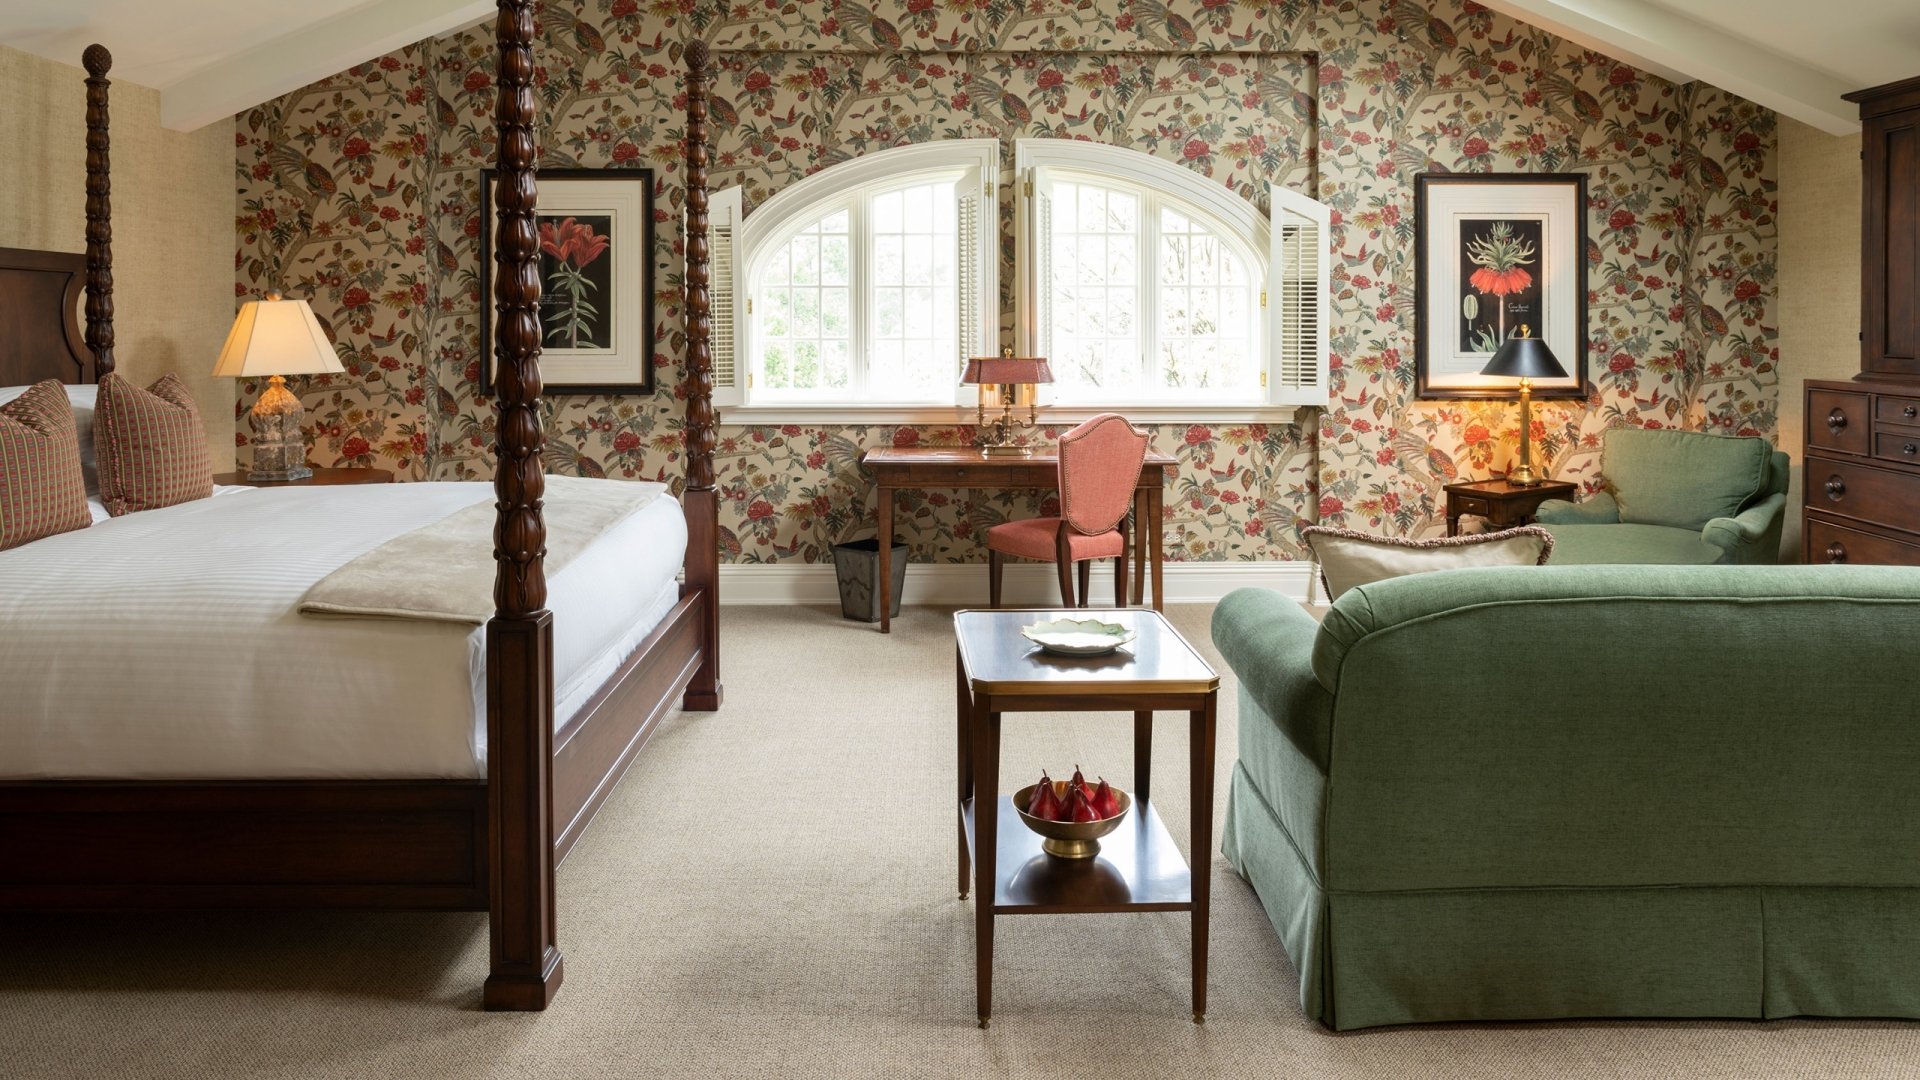 Premier Lake View with bed, seating area, and floral wallpaper.